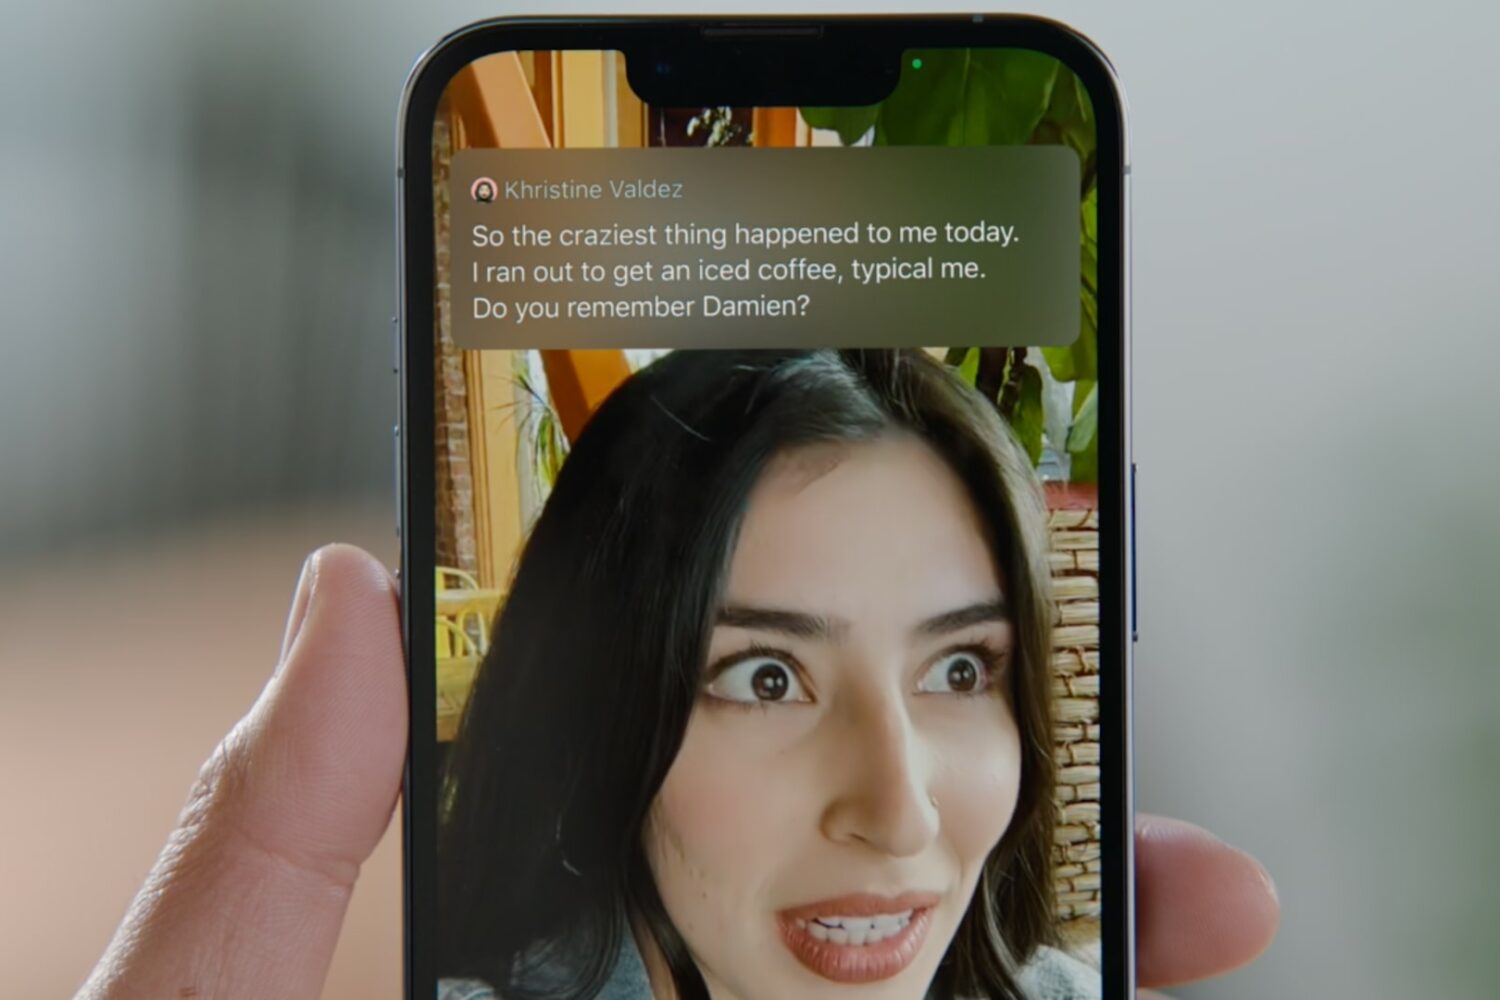 A photograph showing an iPhone held in a person's hand, demonstrating the Live Captions feature in action during a FaceTime video call